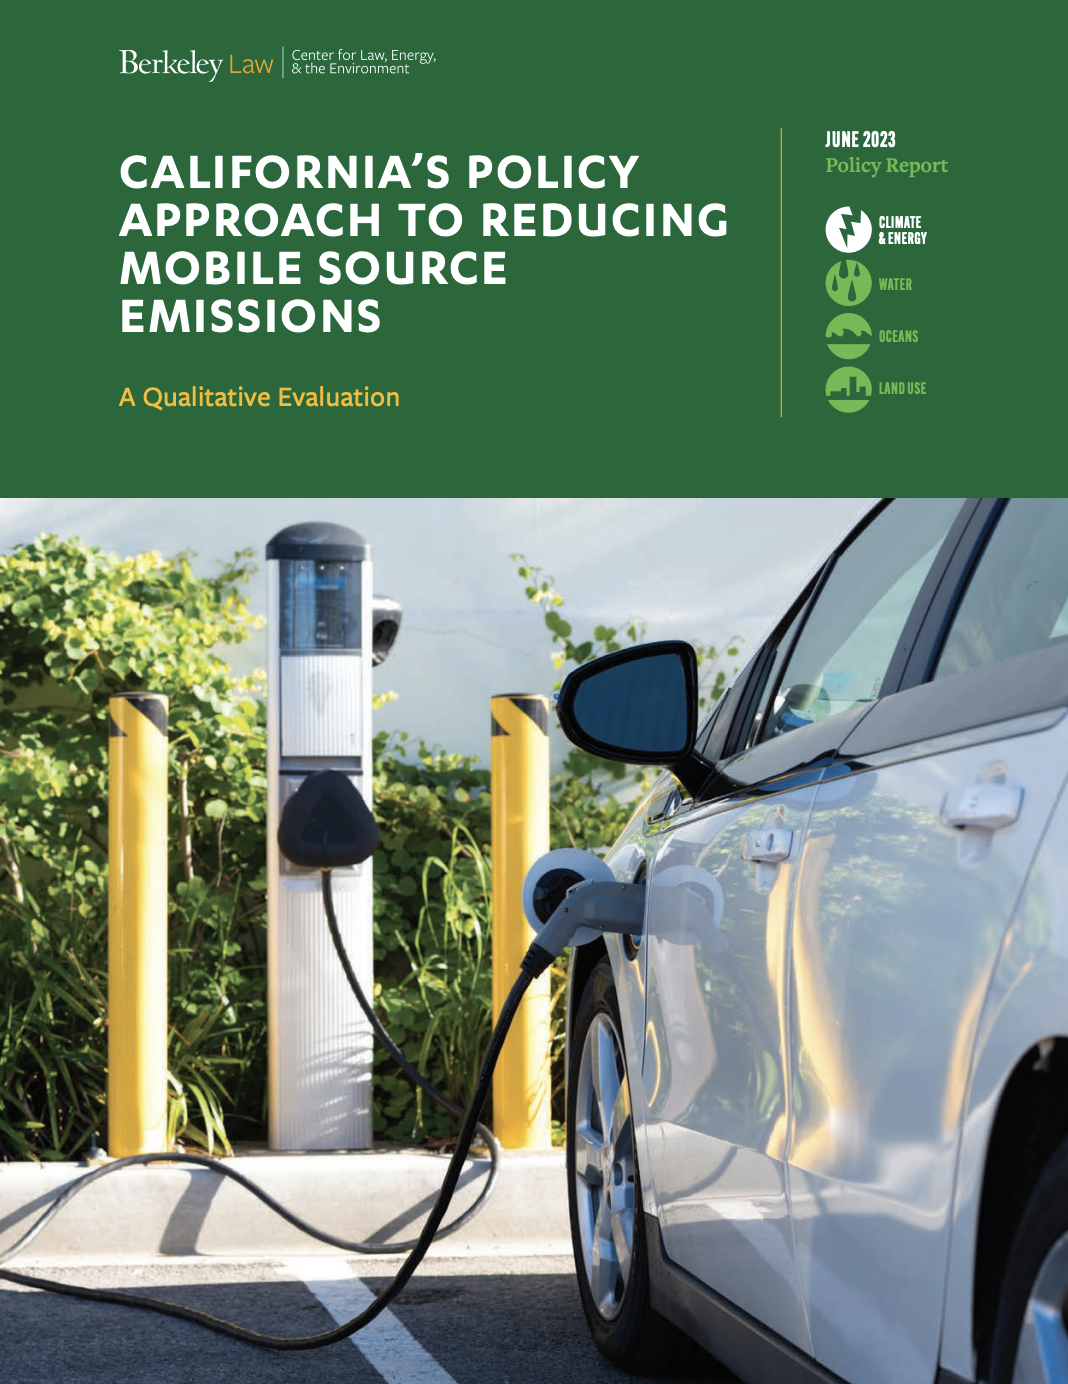 Report title reads, 'CALIFORNIA’S POLICY APPROACH TO REDUCING MOBILE SOURCE EMISSIONS: A Qualitative Evaluation'. Electric vehicle plugged into charging station pictured below title.